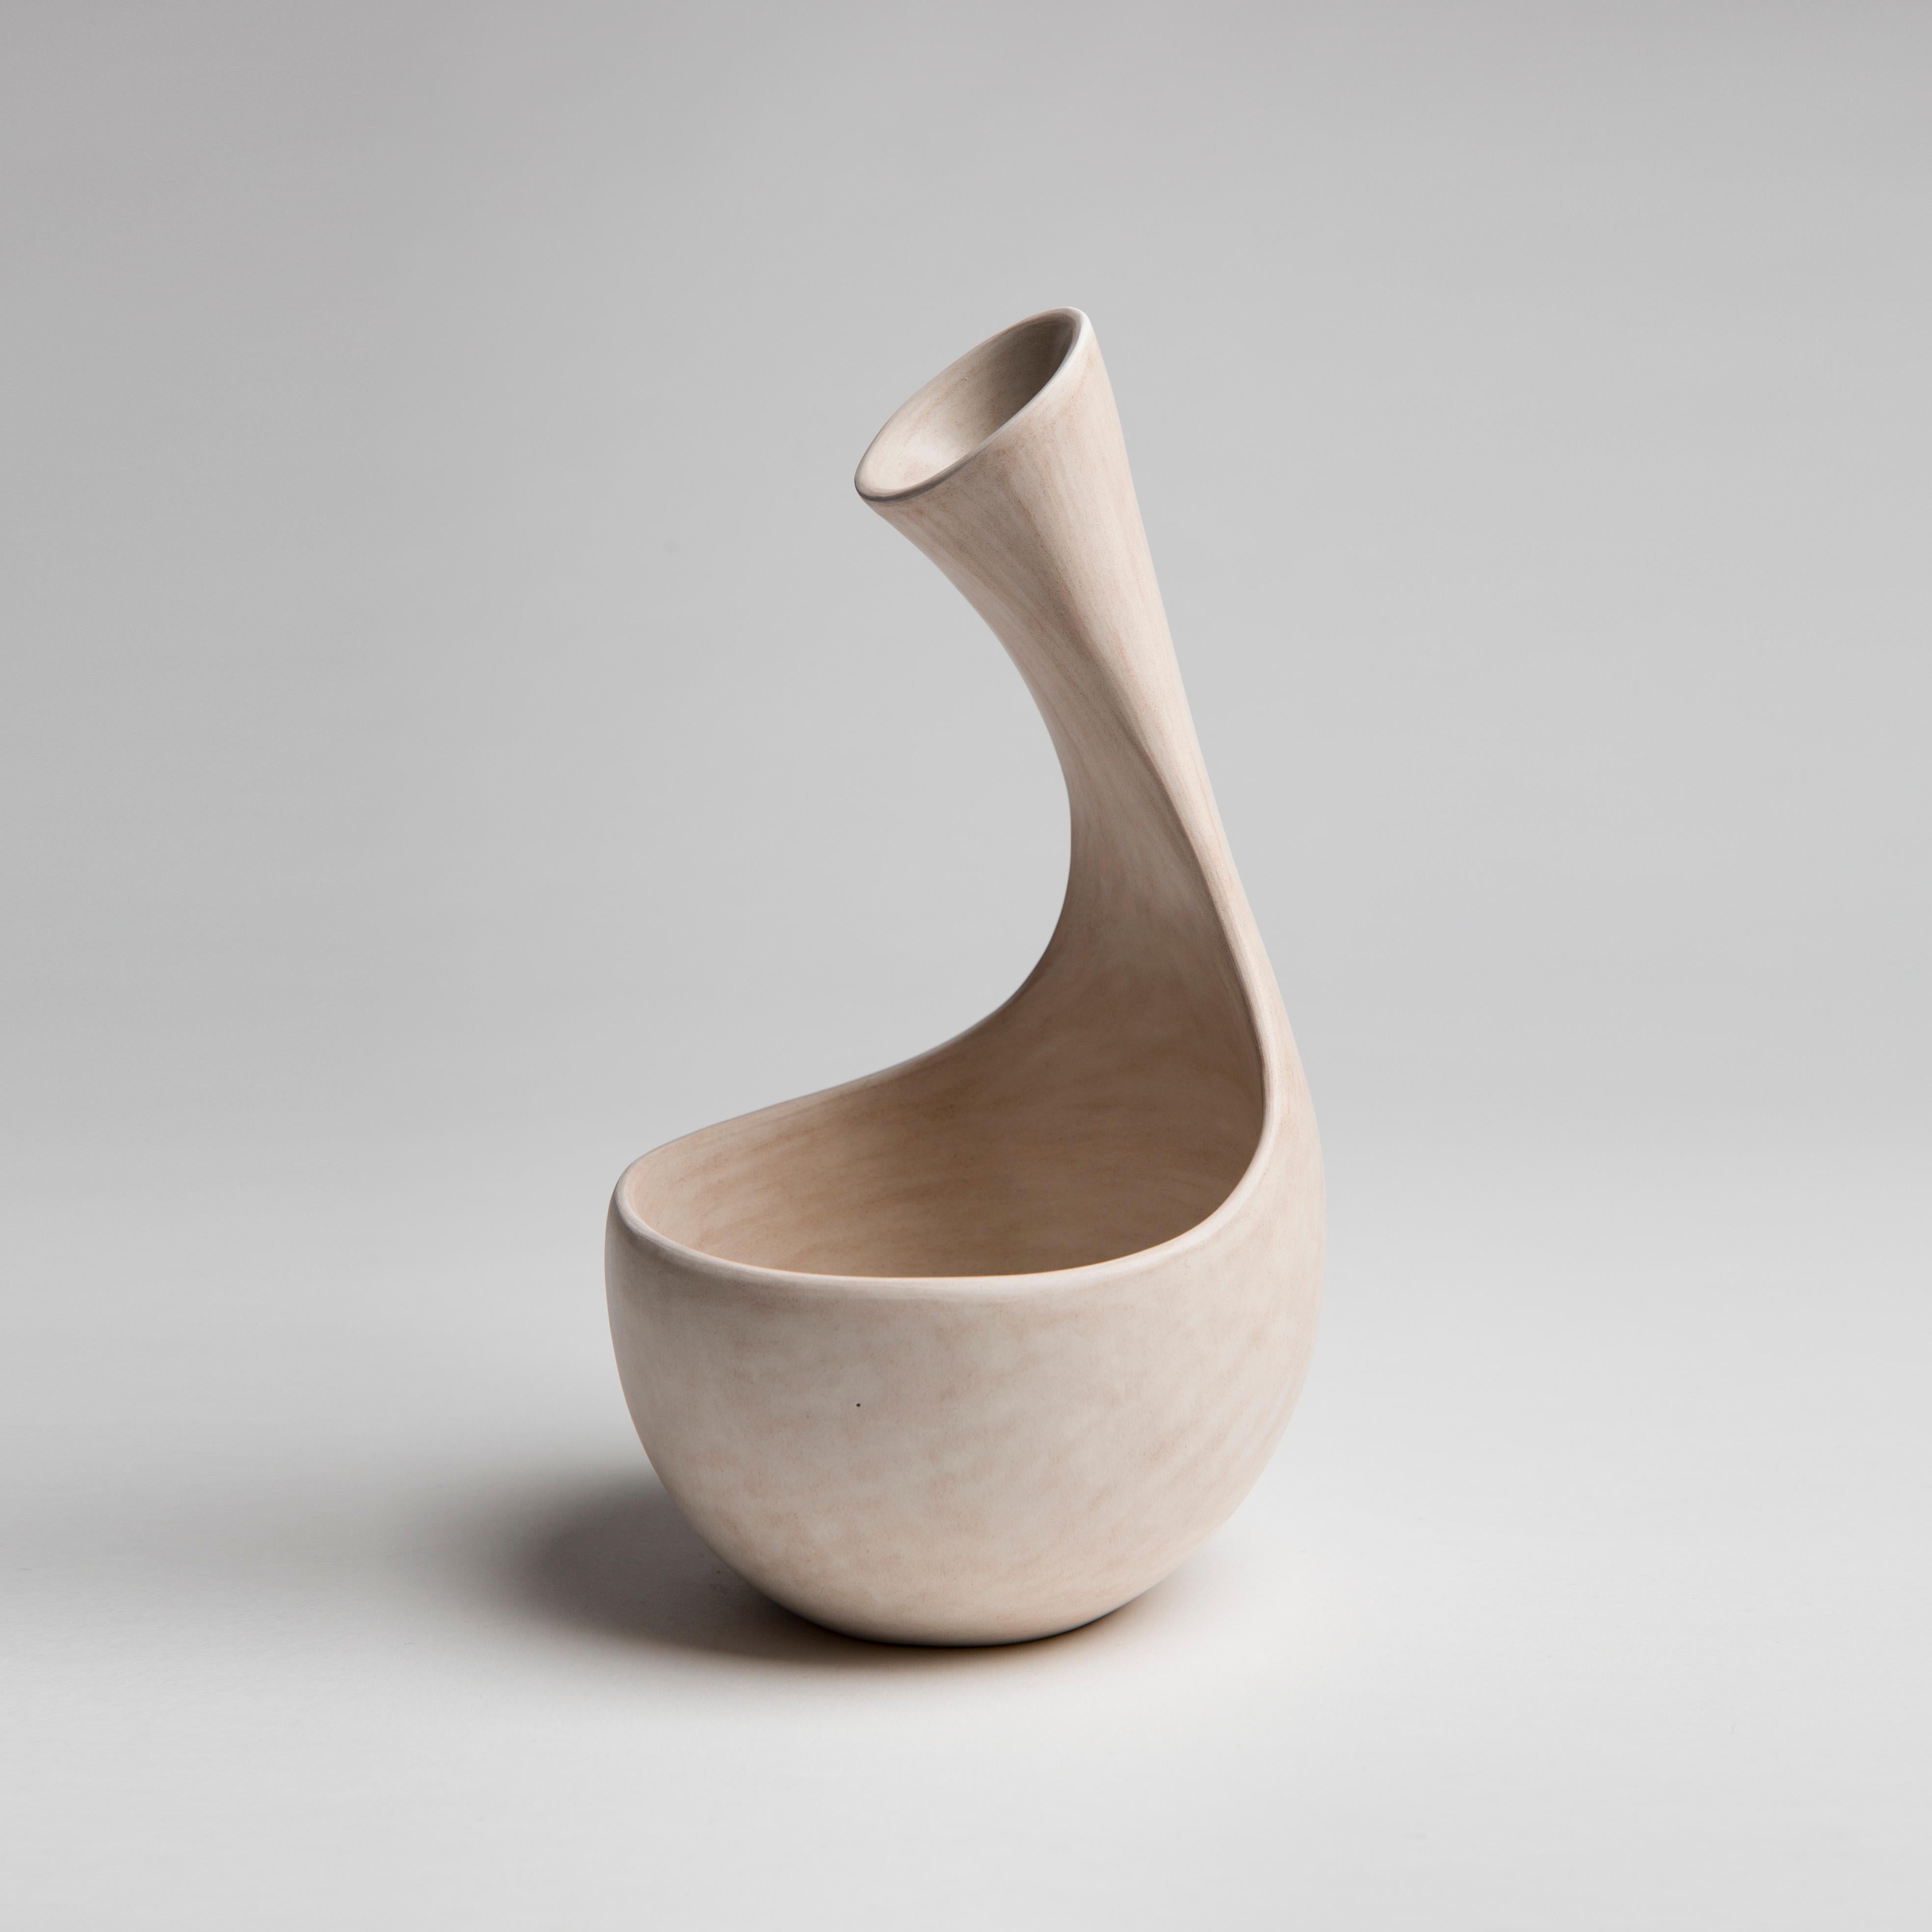 Ode, 2020 (Ceramic, Left to right C. 9 in. h x 5 in. w; 13.75 in. h x 5 in. w; 14.75 in. h x 5 in. w; 9 in. h x 5 in. w, Object No.: 3929)

Tina Vlassopulos was born in London in 1954. After graduating from Bristol Polytechnic in 1977, she returned